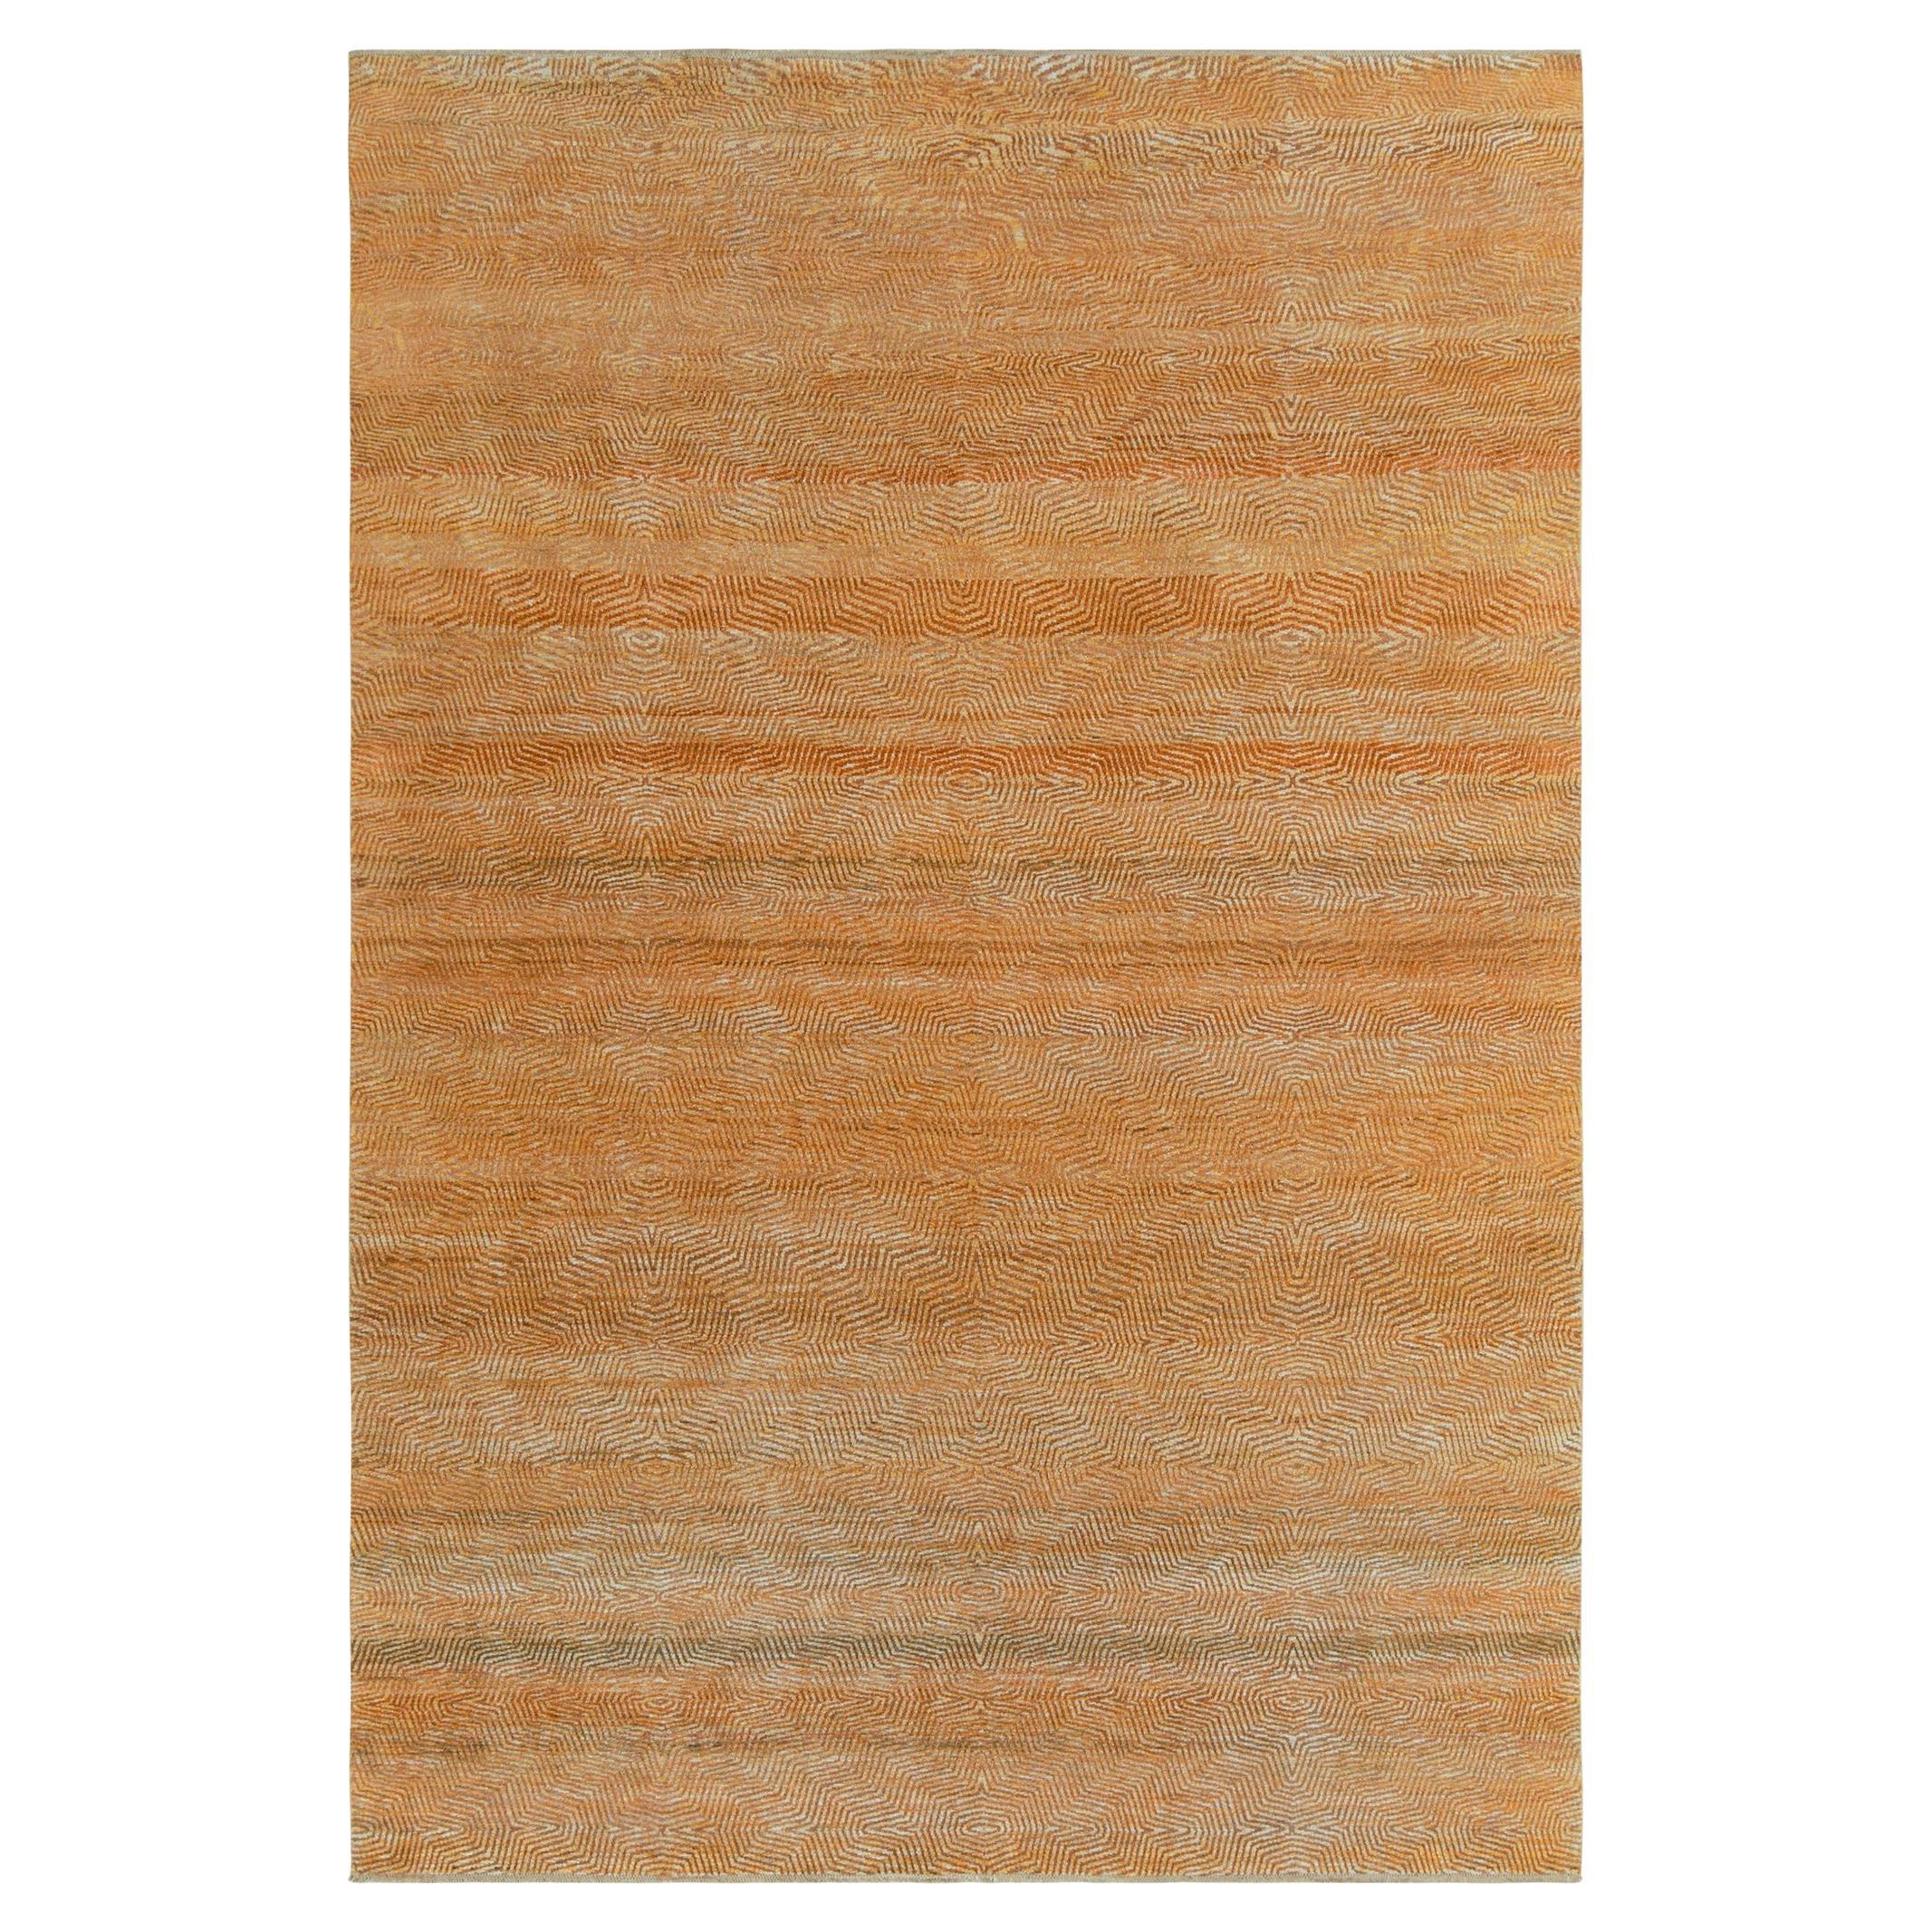 Rug & Kilim’s Hand-Knotted Rug in Gold-Orange, Brown Striations